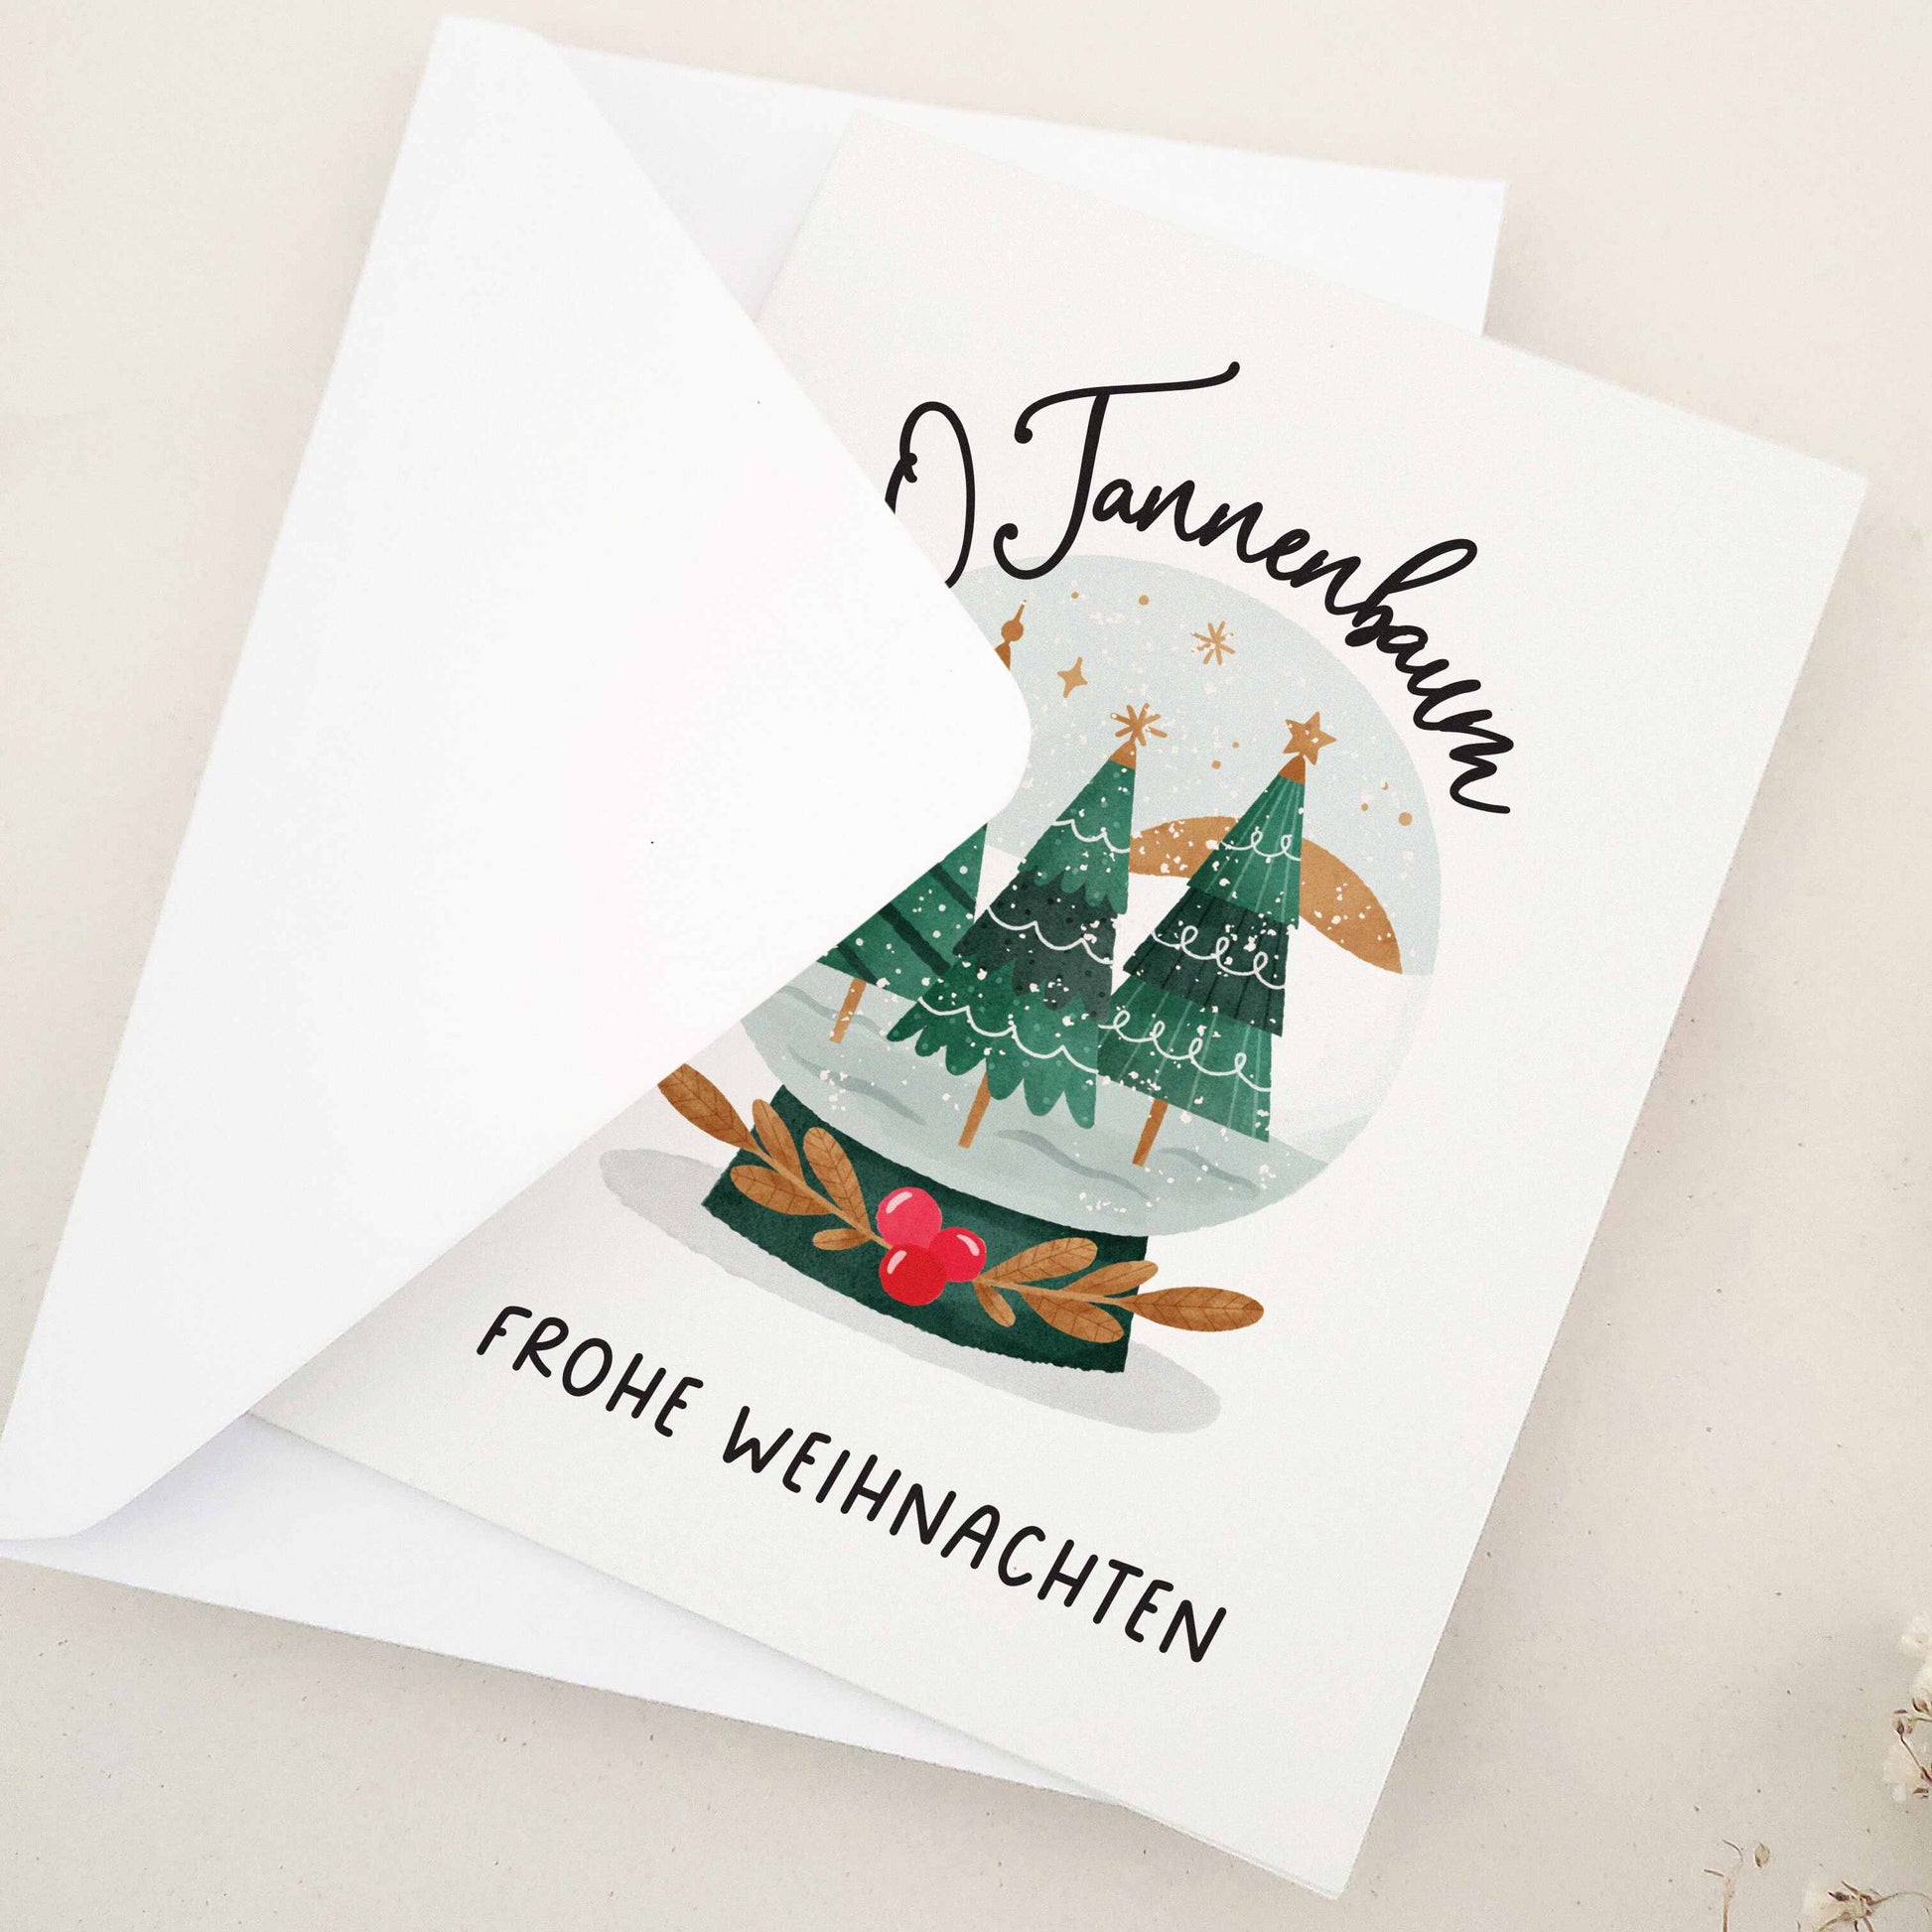 Enchanting 'O Tannenbaum, Frohe Weihnachten' card, paying homage to the classic German Christmas carol. Features a serene snow globe scene with evergreen trees, capturing the essence of 'O Tannenbaum'. The imagery creates a magical, peaceful winter evening atmosphere, reflecting the enduring charm and warmth of the holiday season.